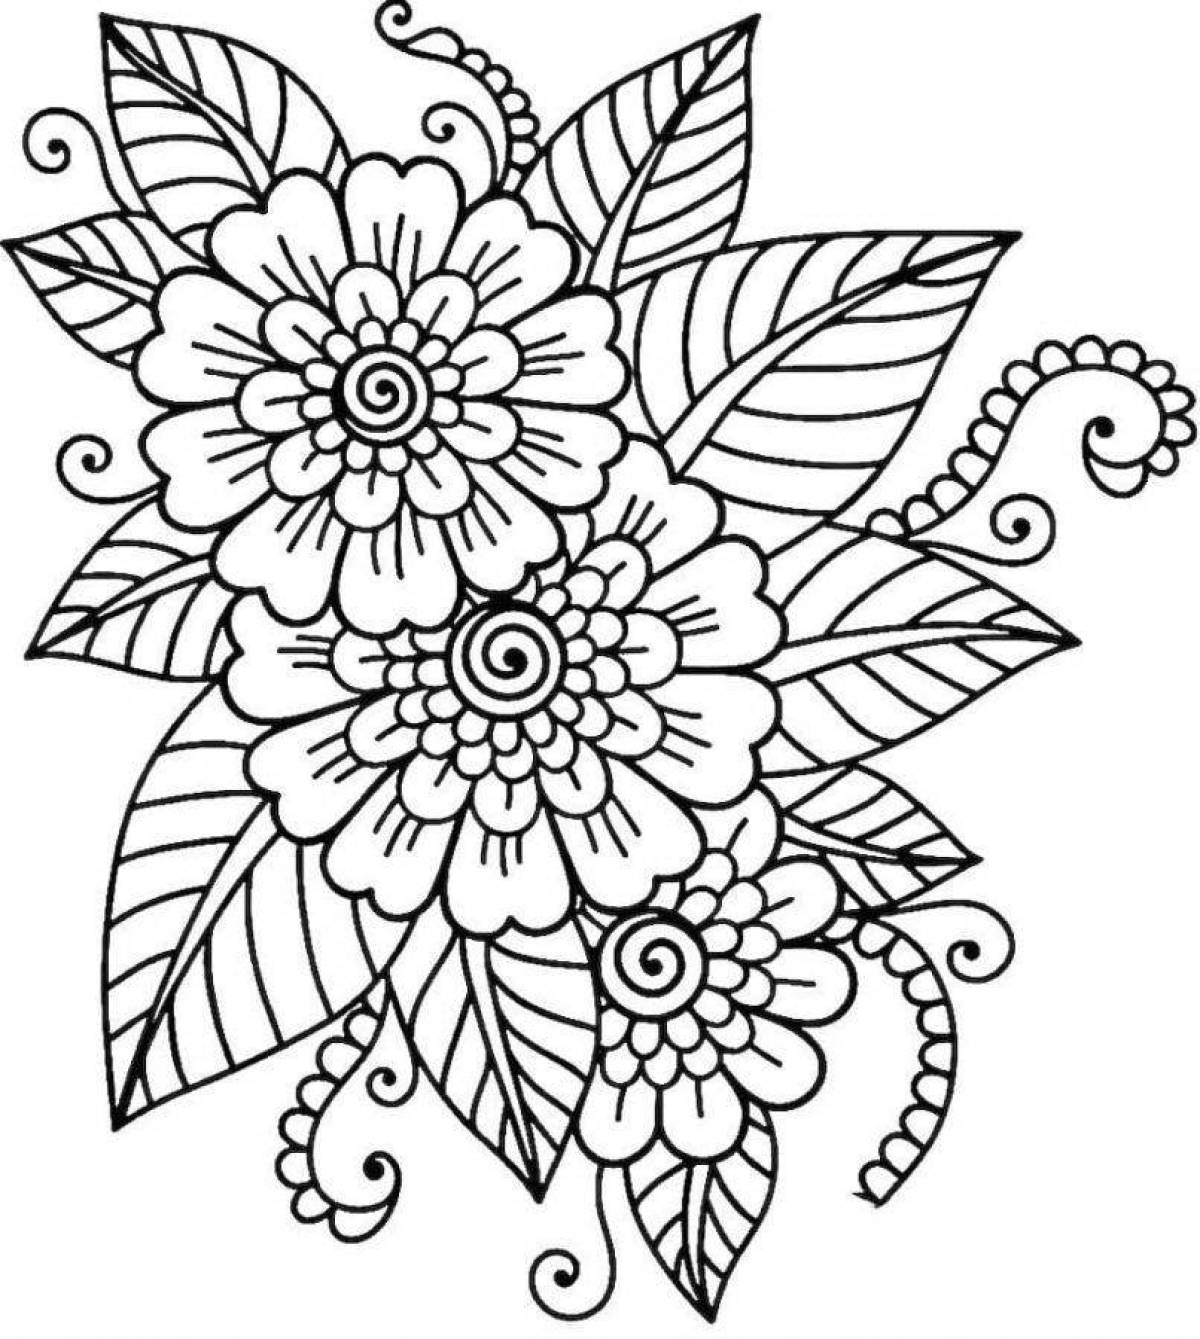 Coloring book colorful-exploration